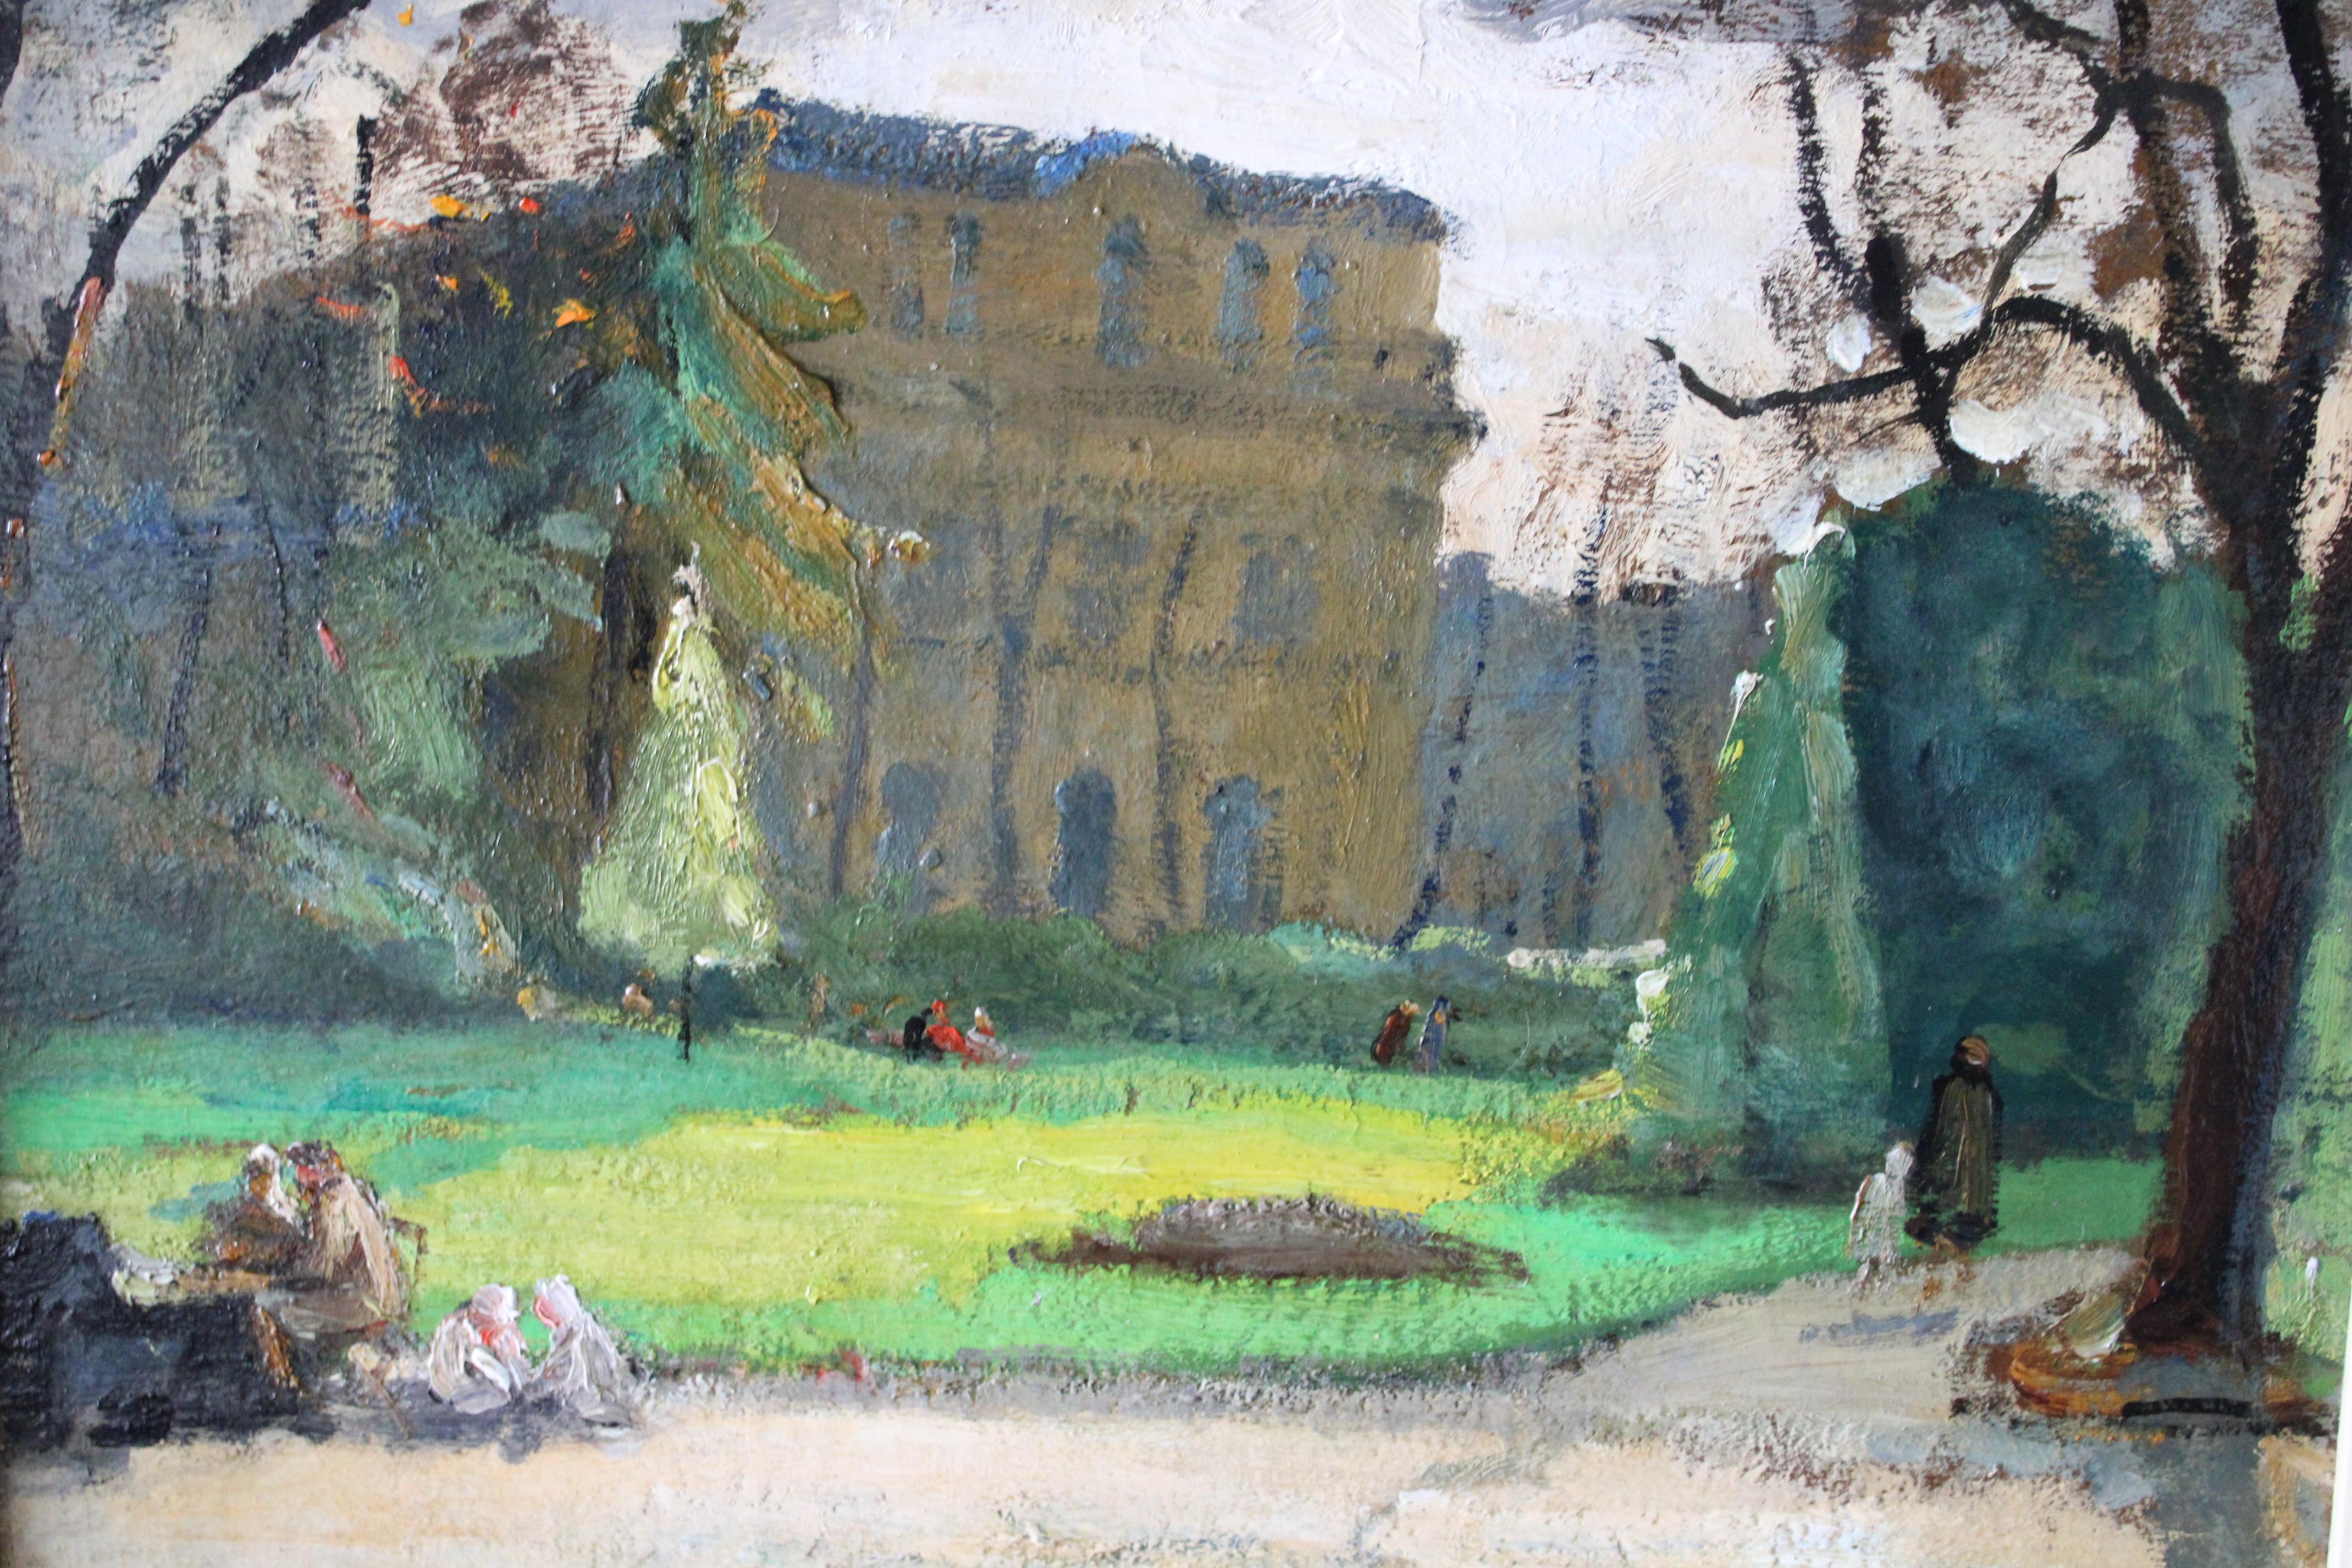 Vintage Landscape Oil Painting of a Chateau & Park, signed and dated 1944 - Brown Landscape Painting by Alban Taracole